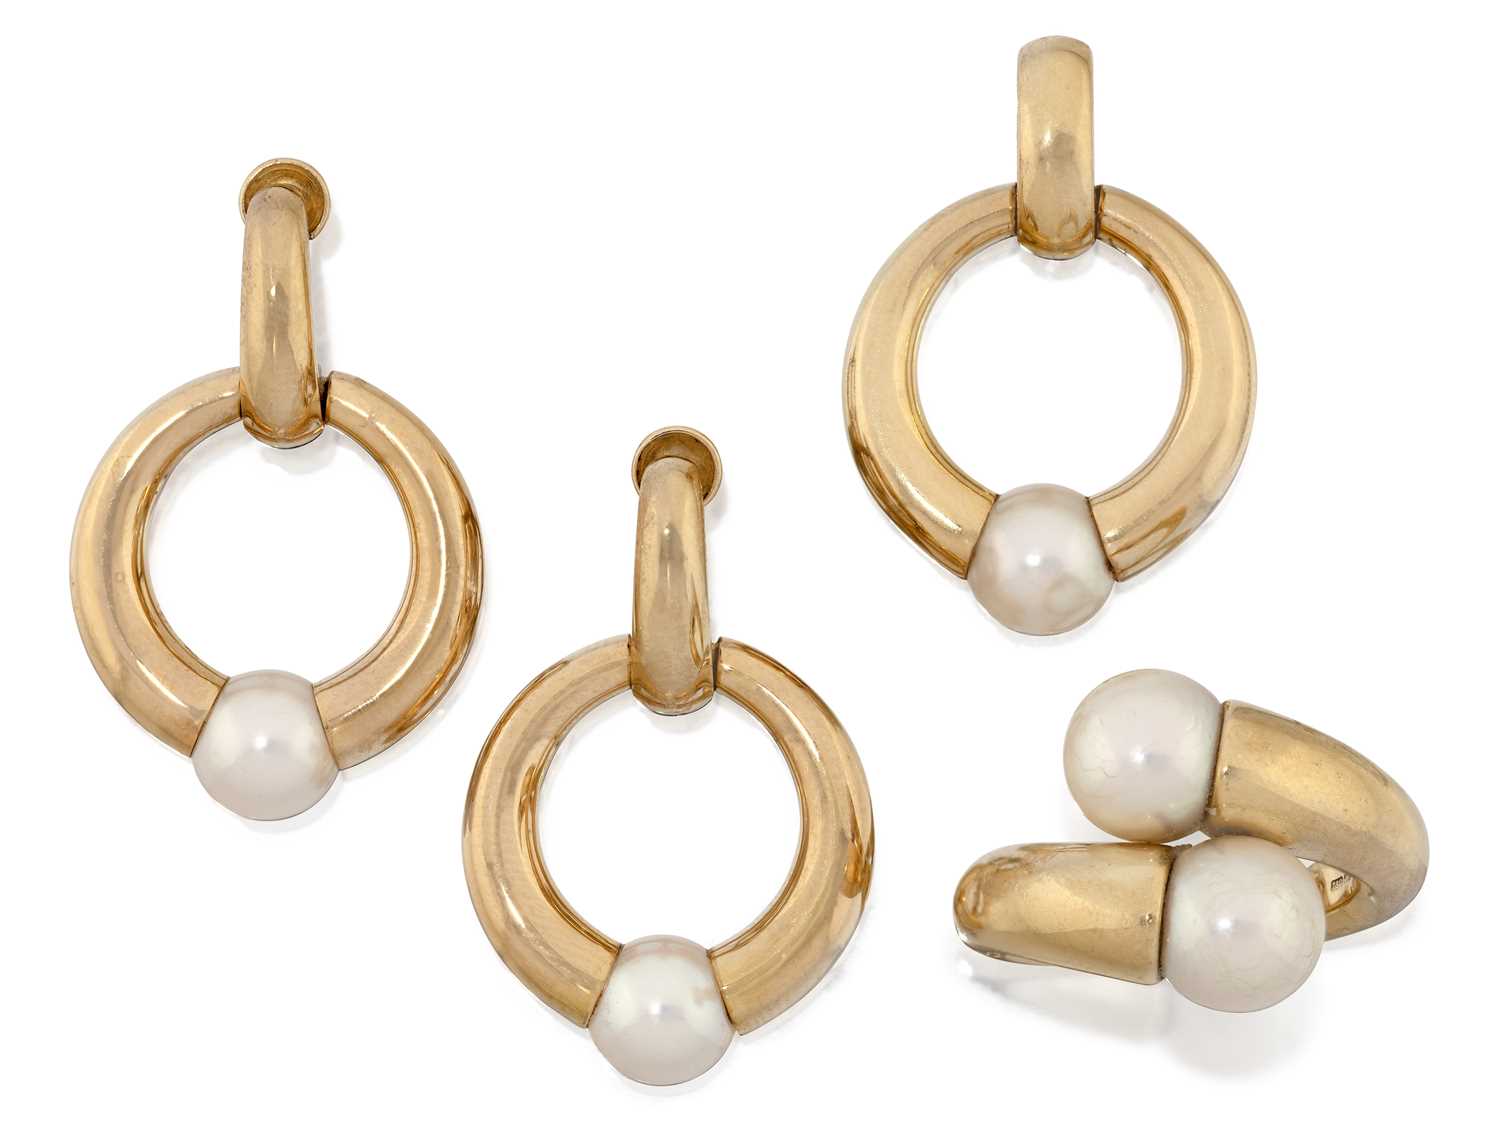 A Cultured Pearl Ring and Pendant, by Cartier and A Pair of Matching Drop Earrings